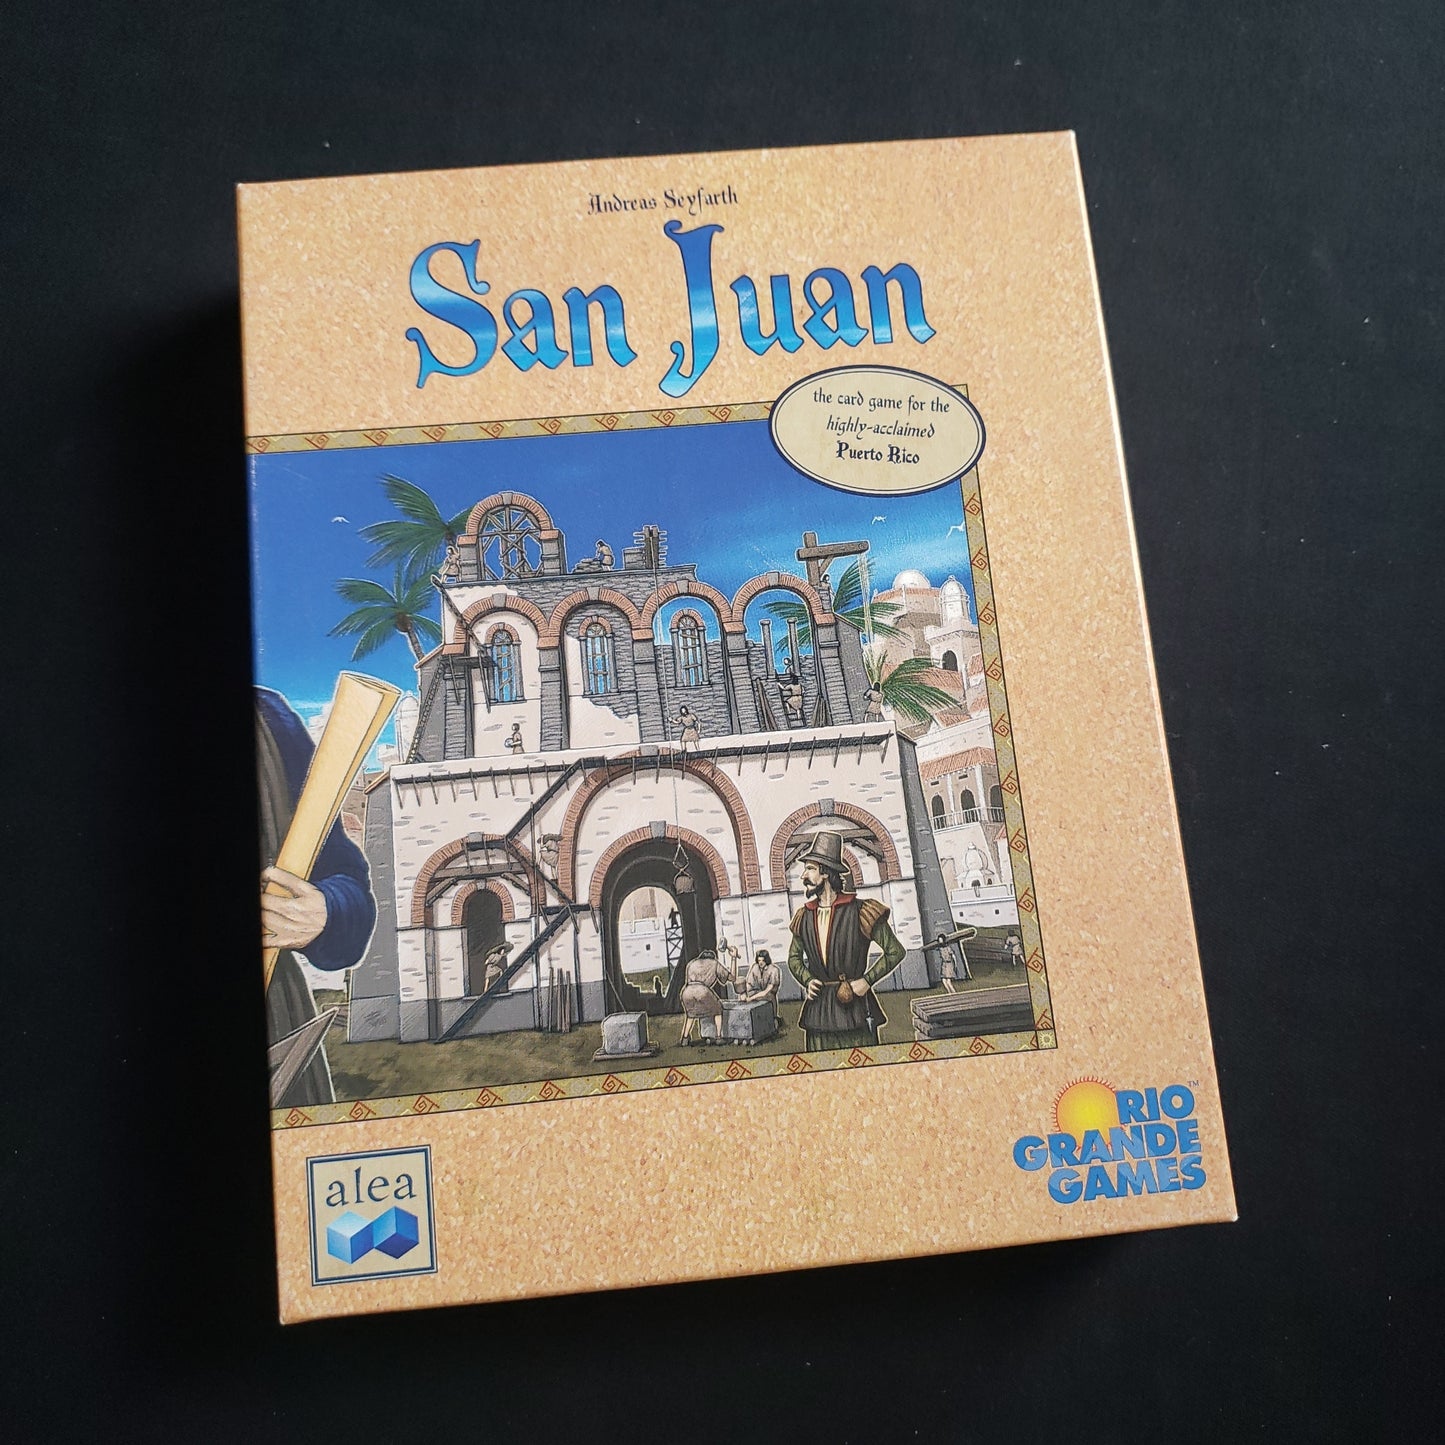 Image shows the front cover of the box of the San Juan card game